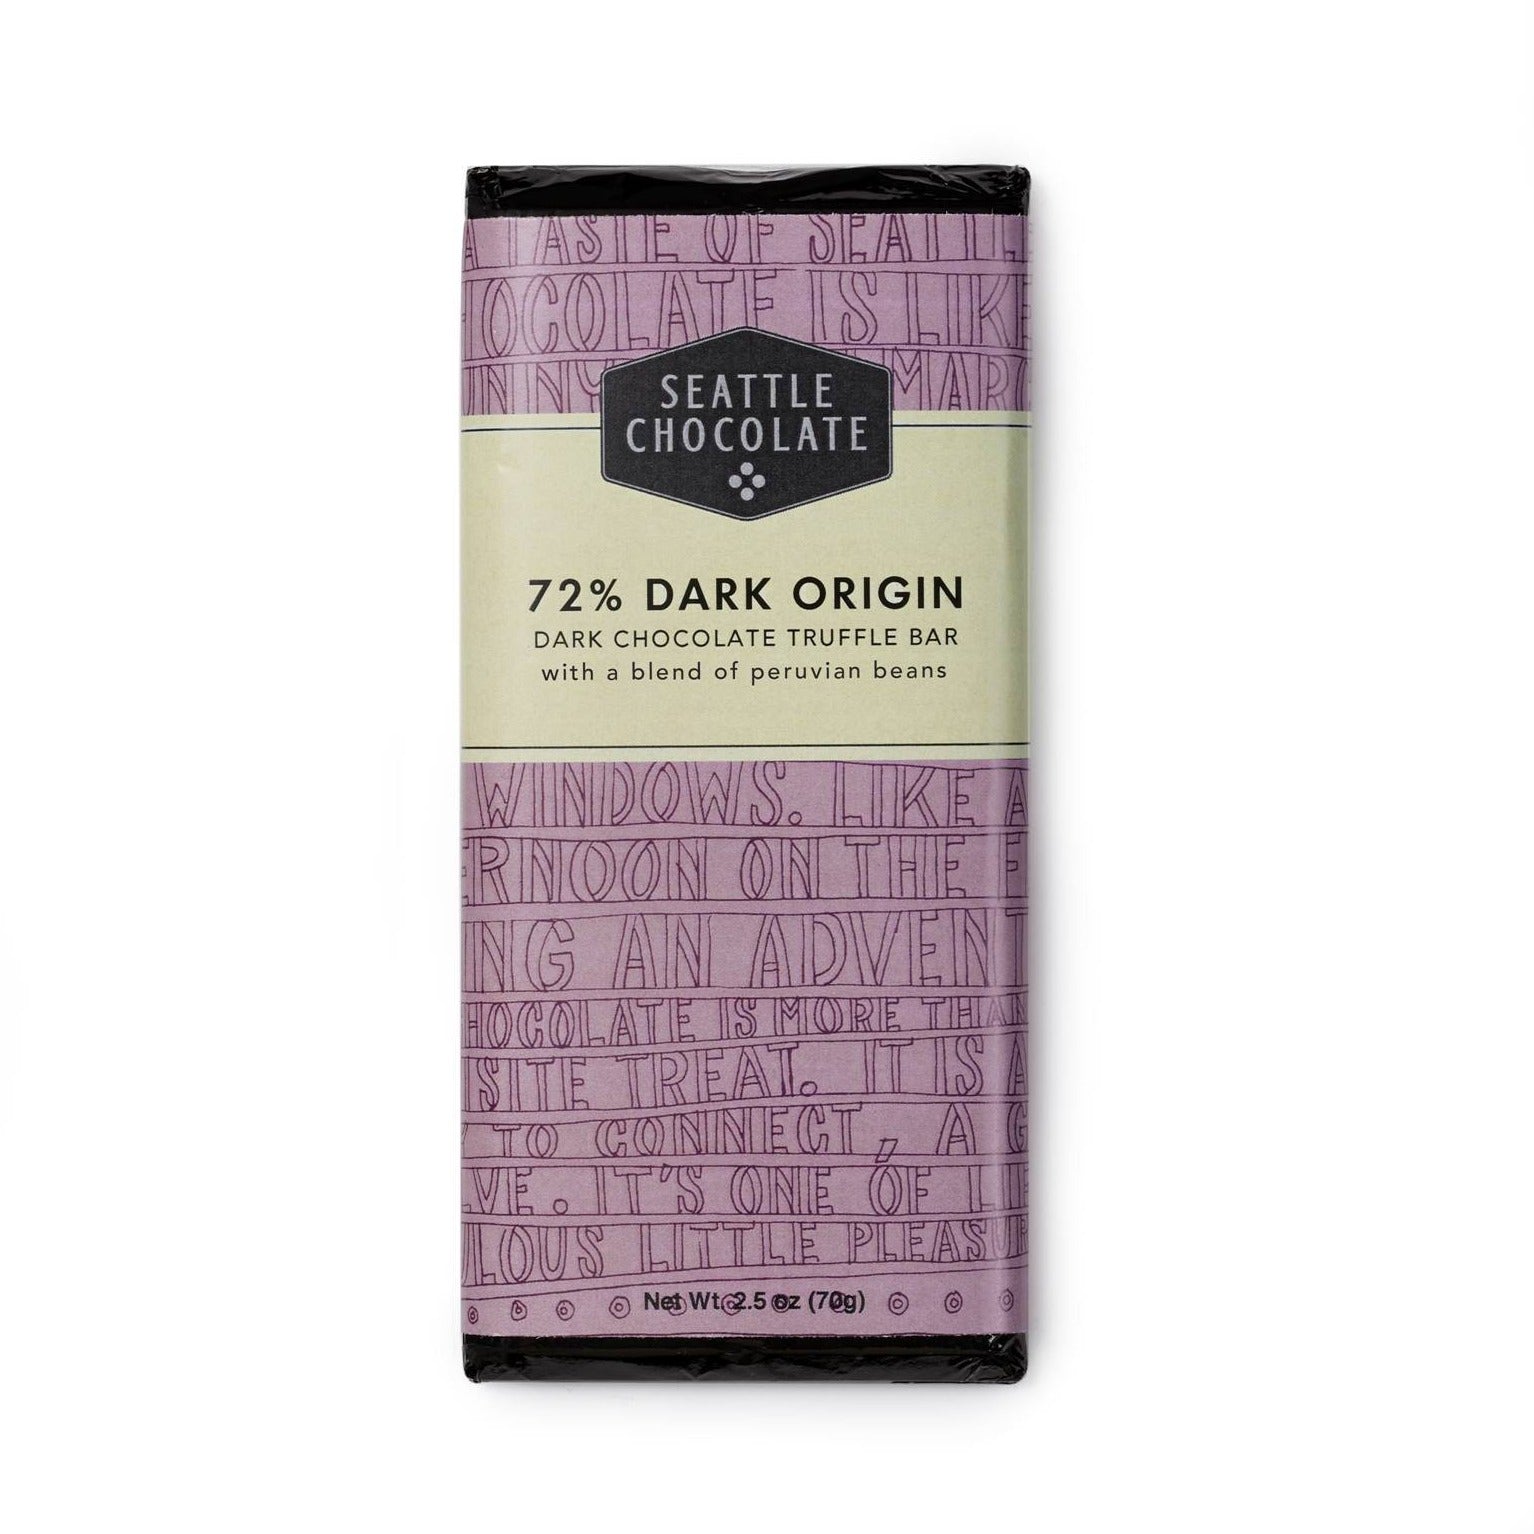 Rich and creamy dark chocolate truffle bar with fruity notes